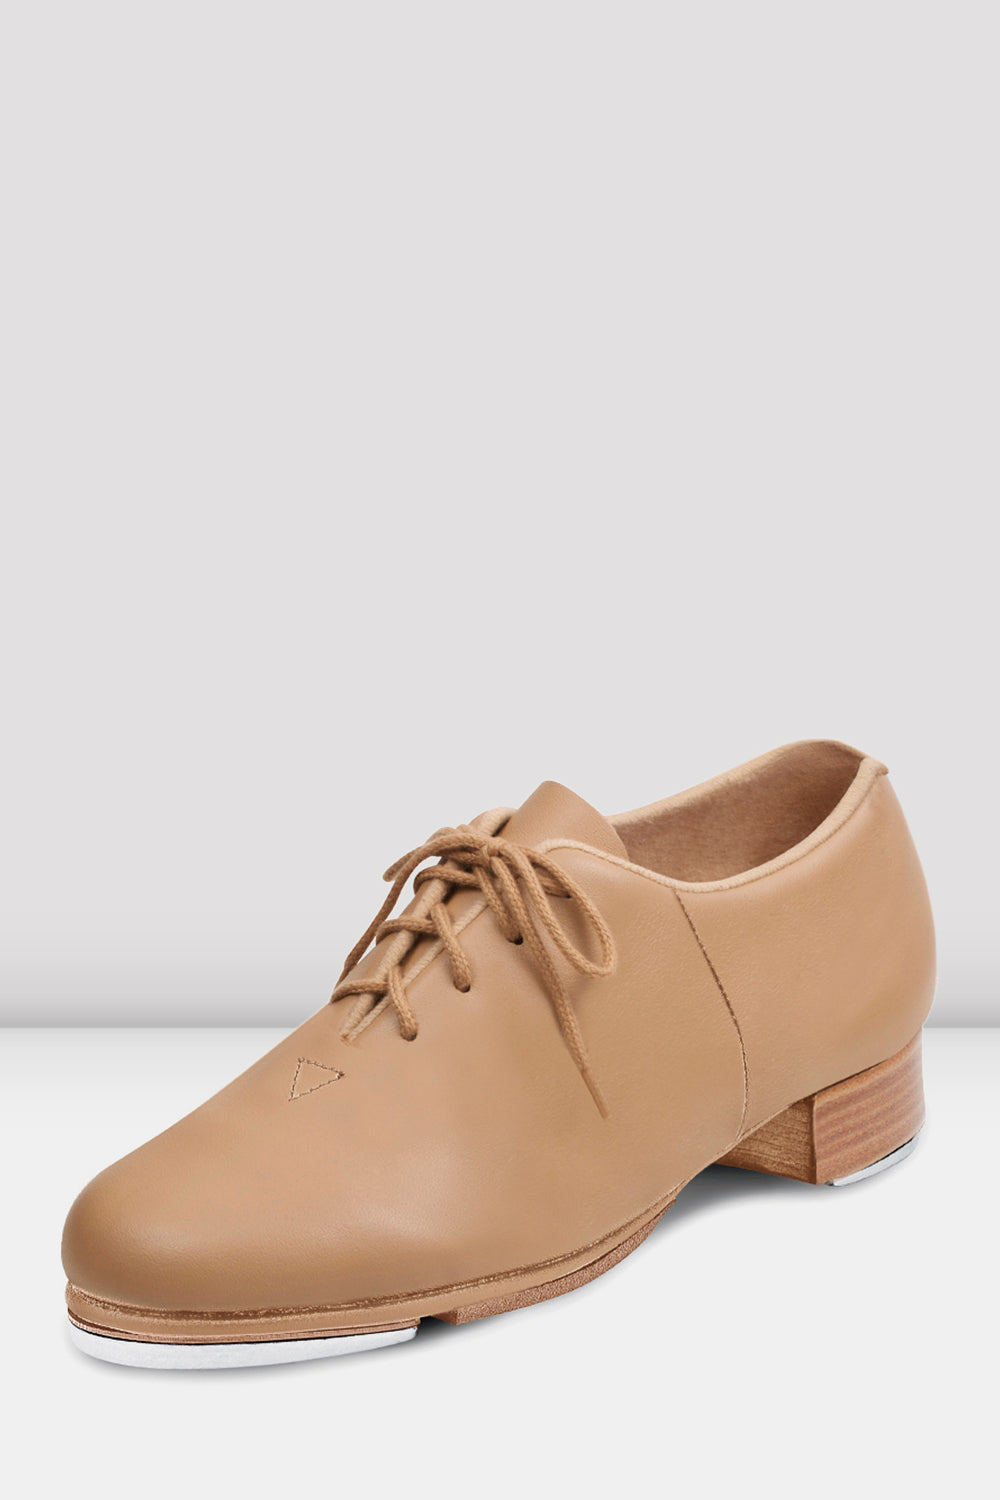 oxford style tap shoes